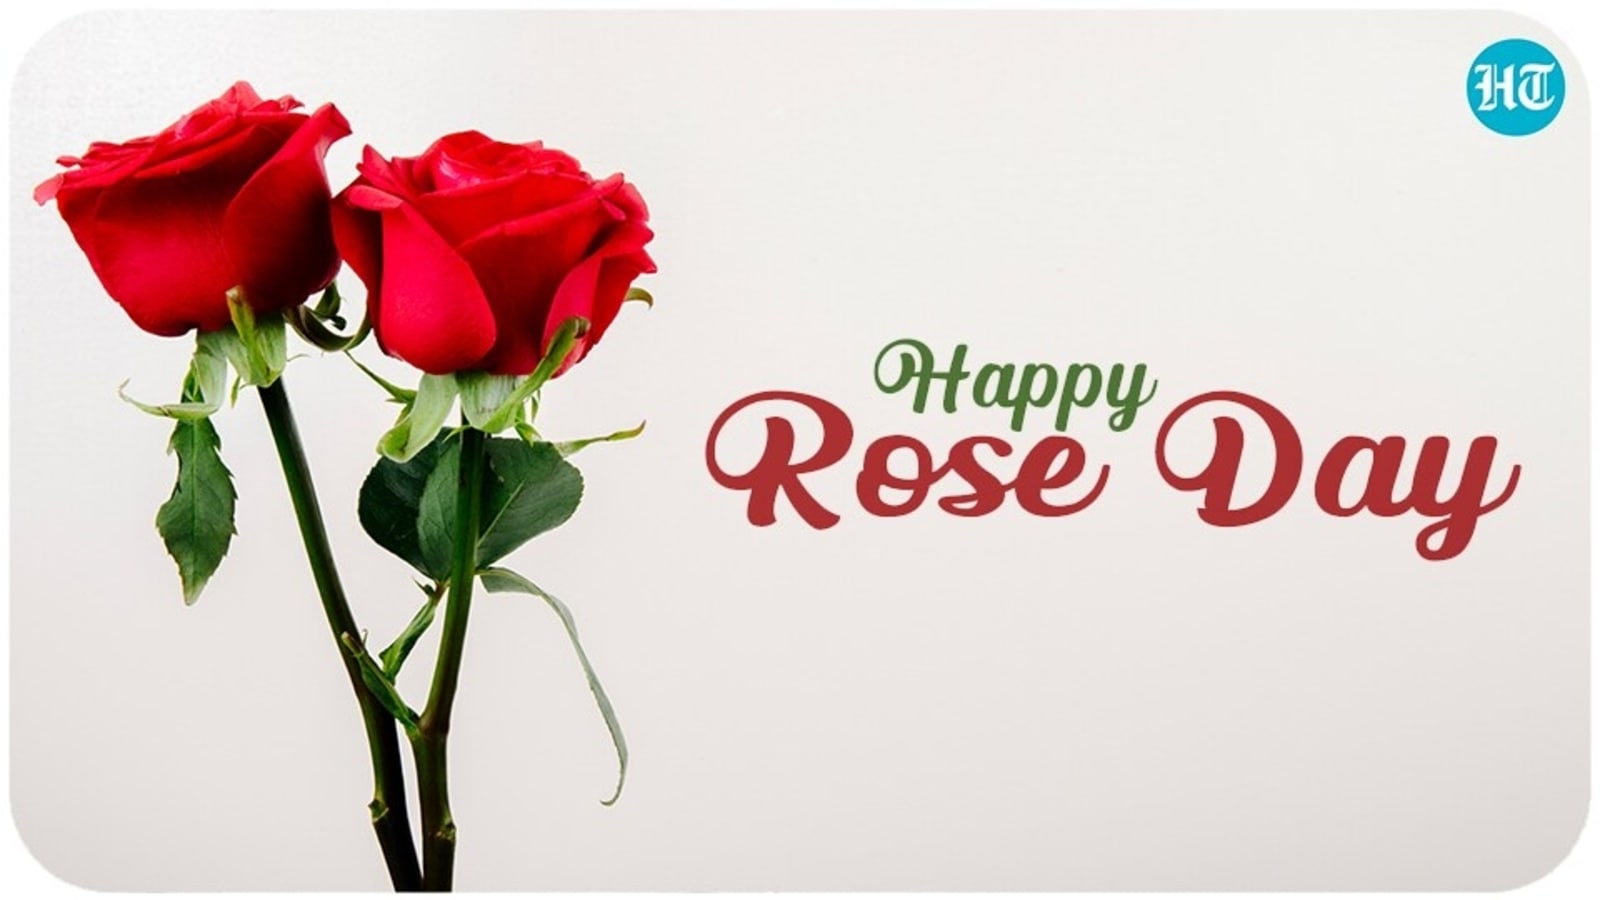 Incredible Compilation of 999+ Joyful Rose Day Images in Full 4K Resolution